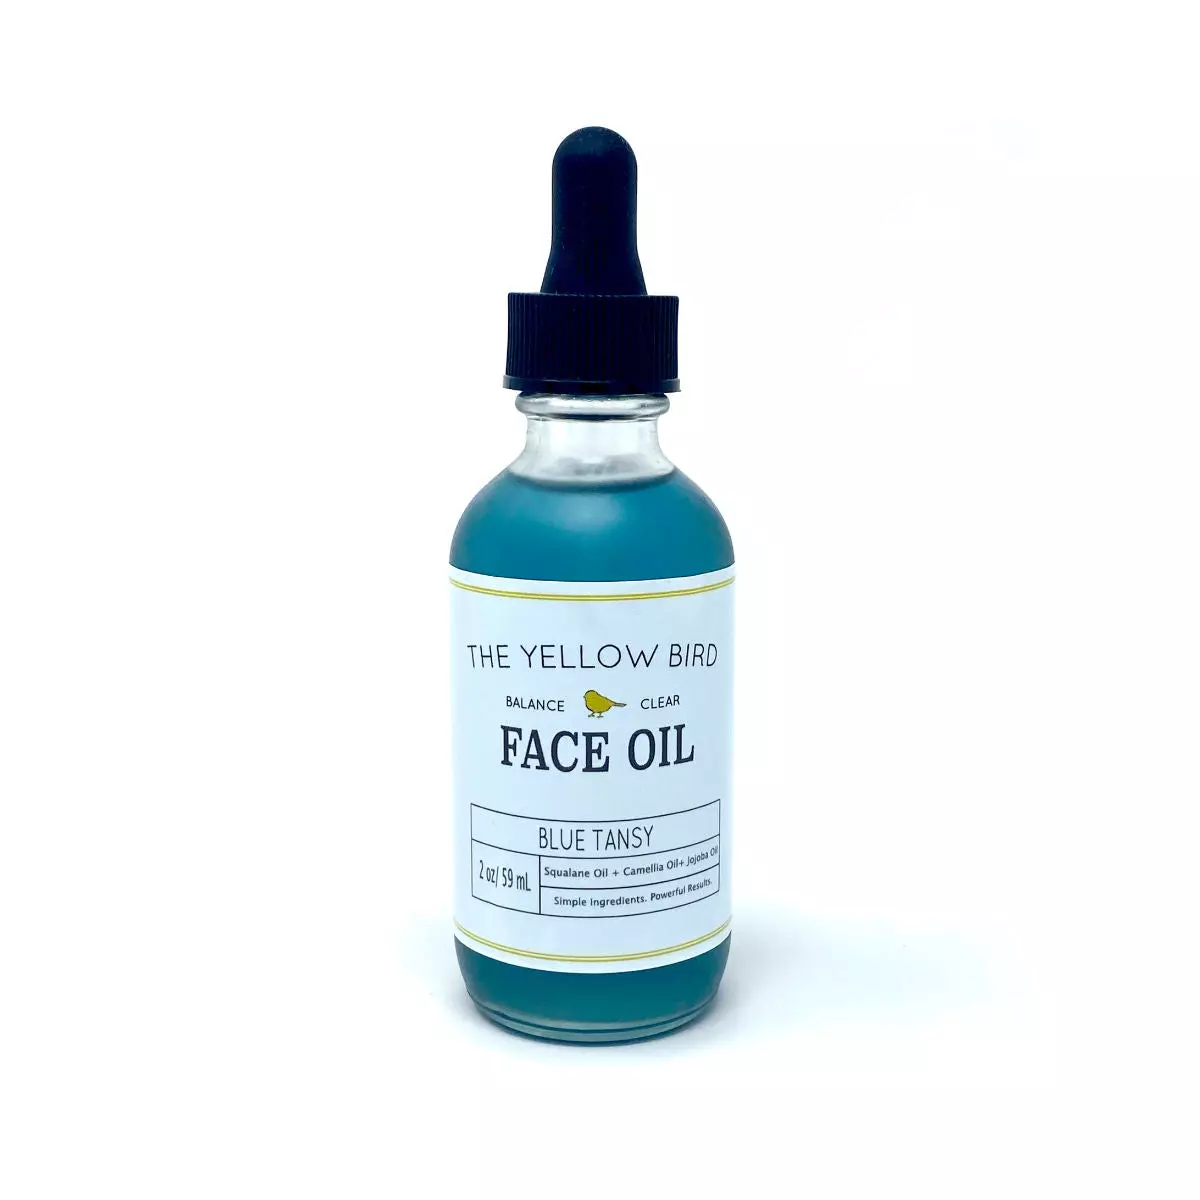 The Yellow Bird Blue Tansy Face Oil